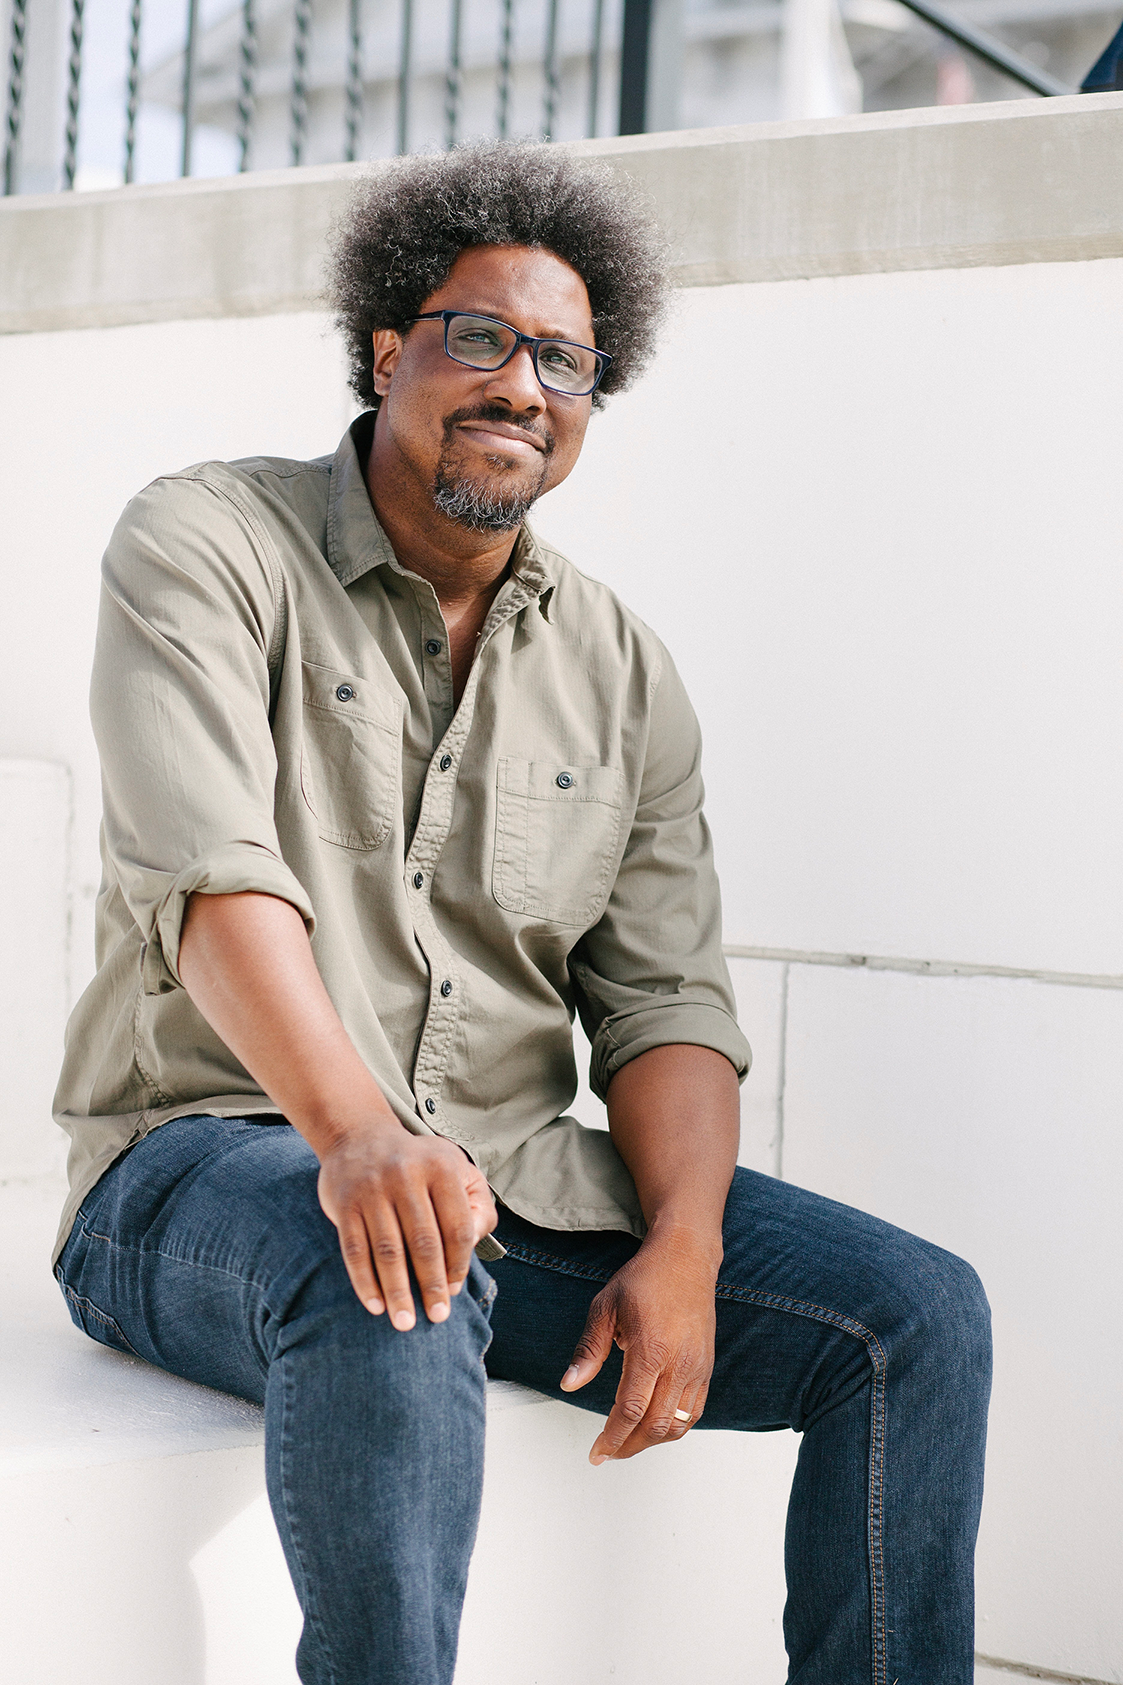 149: W. Kamau Bell on ”We Need to Talk About Cosby”